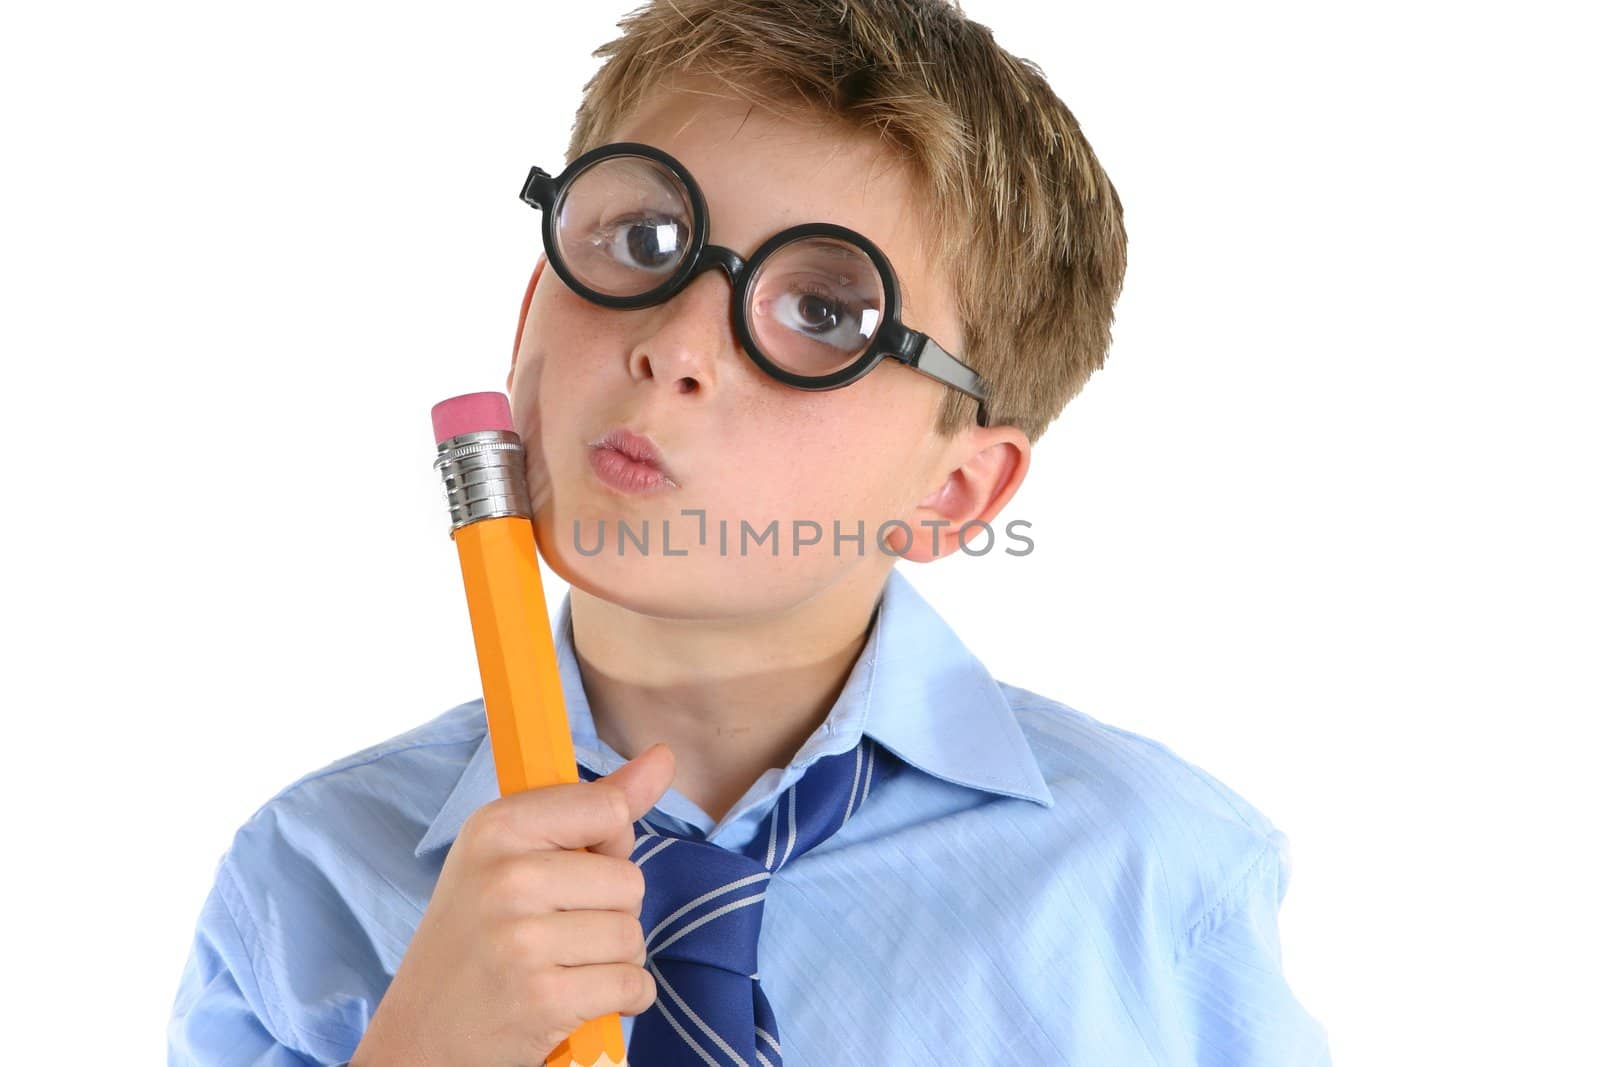 A child or schoolboy in a comical thinking pose.